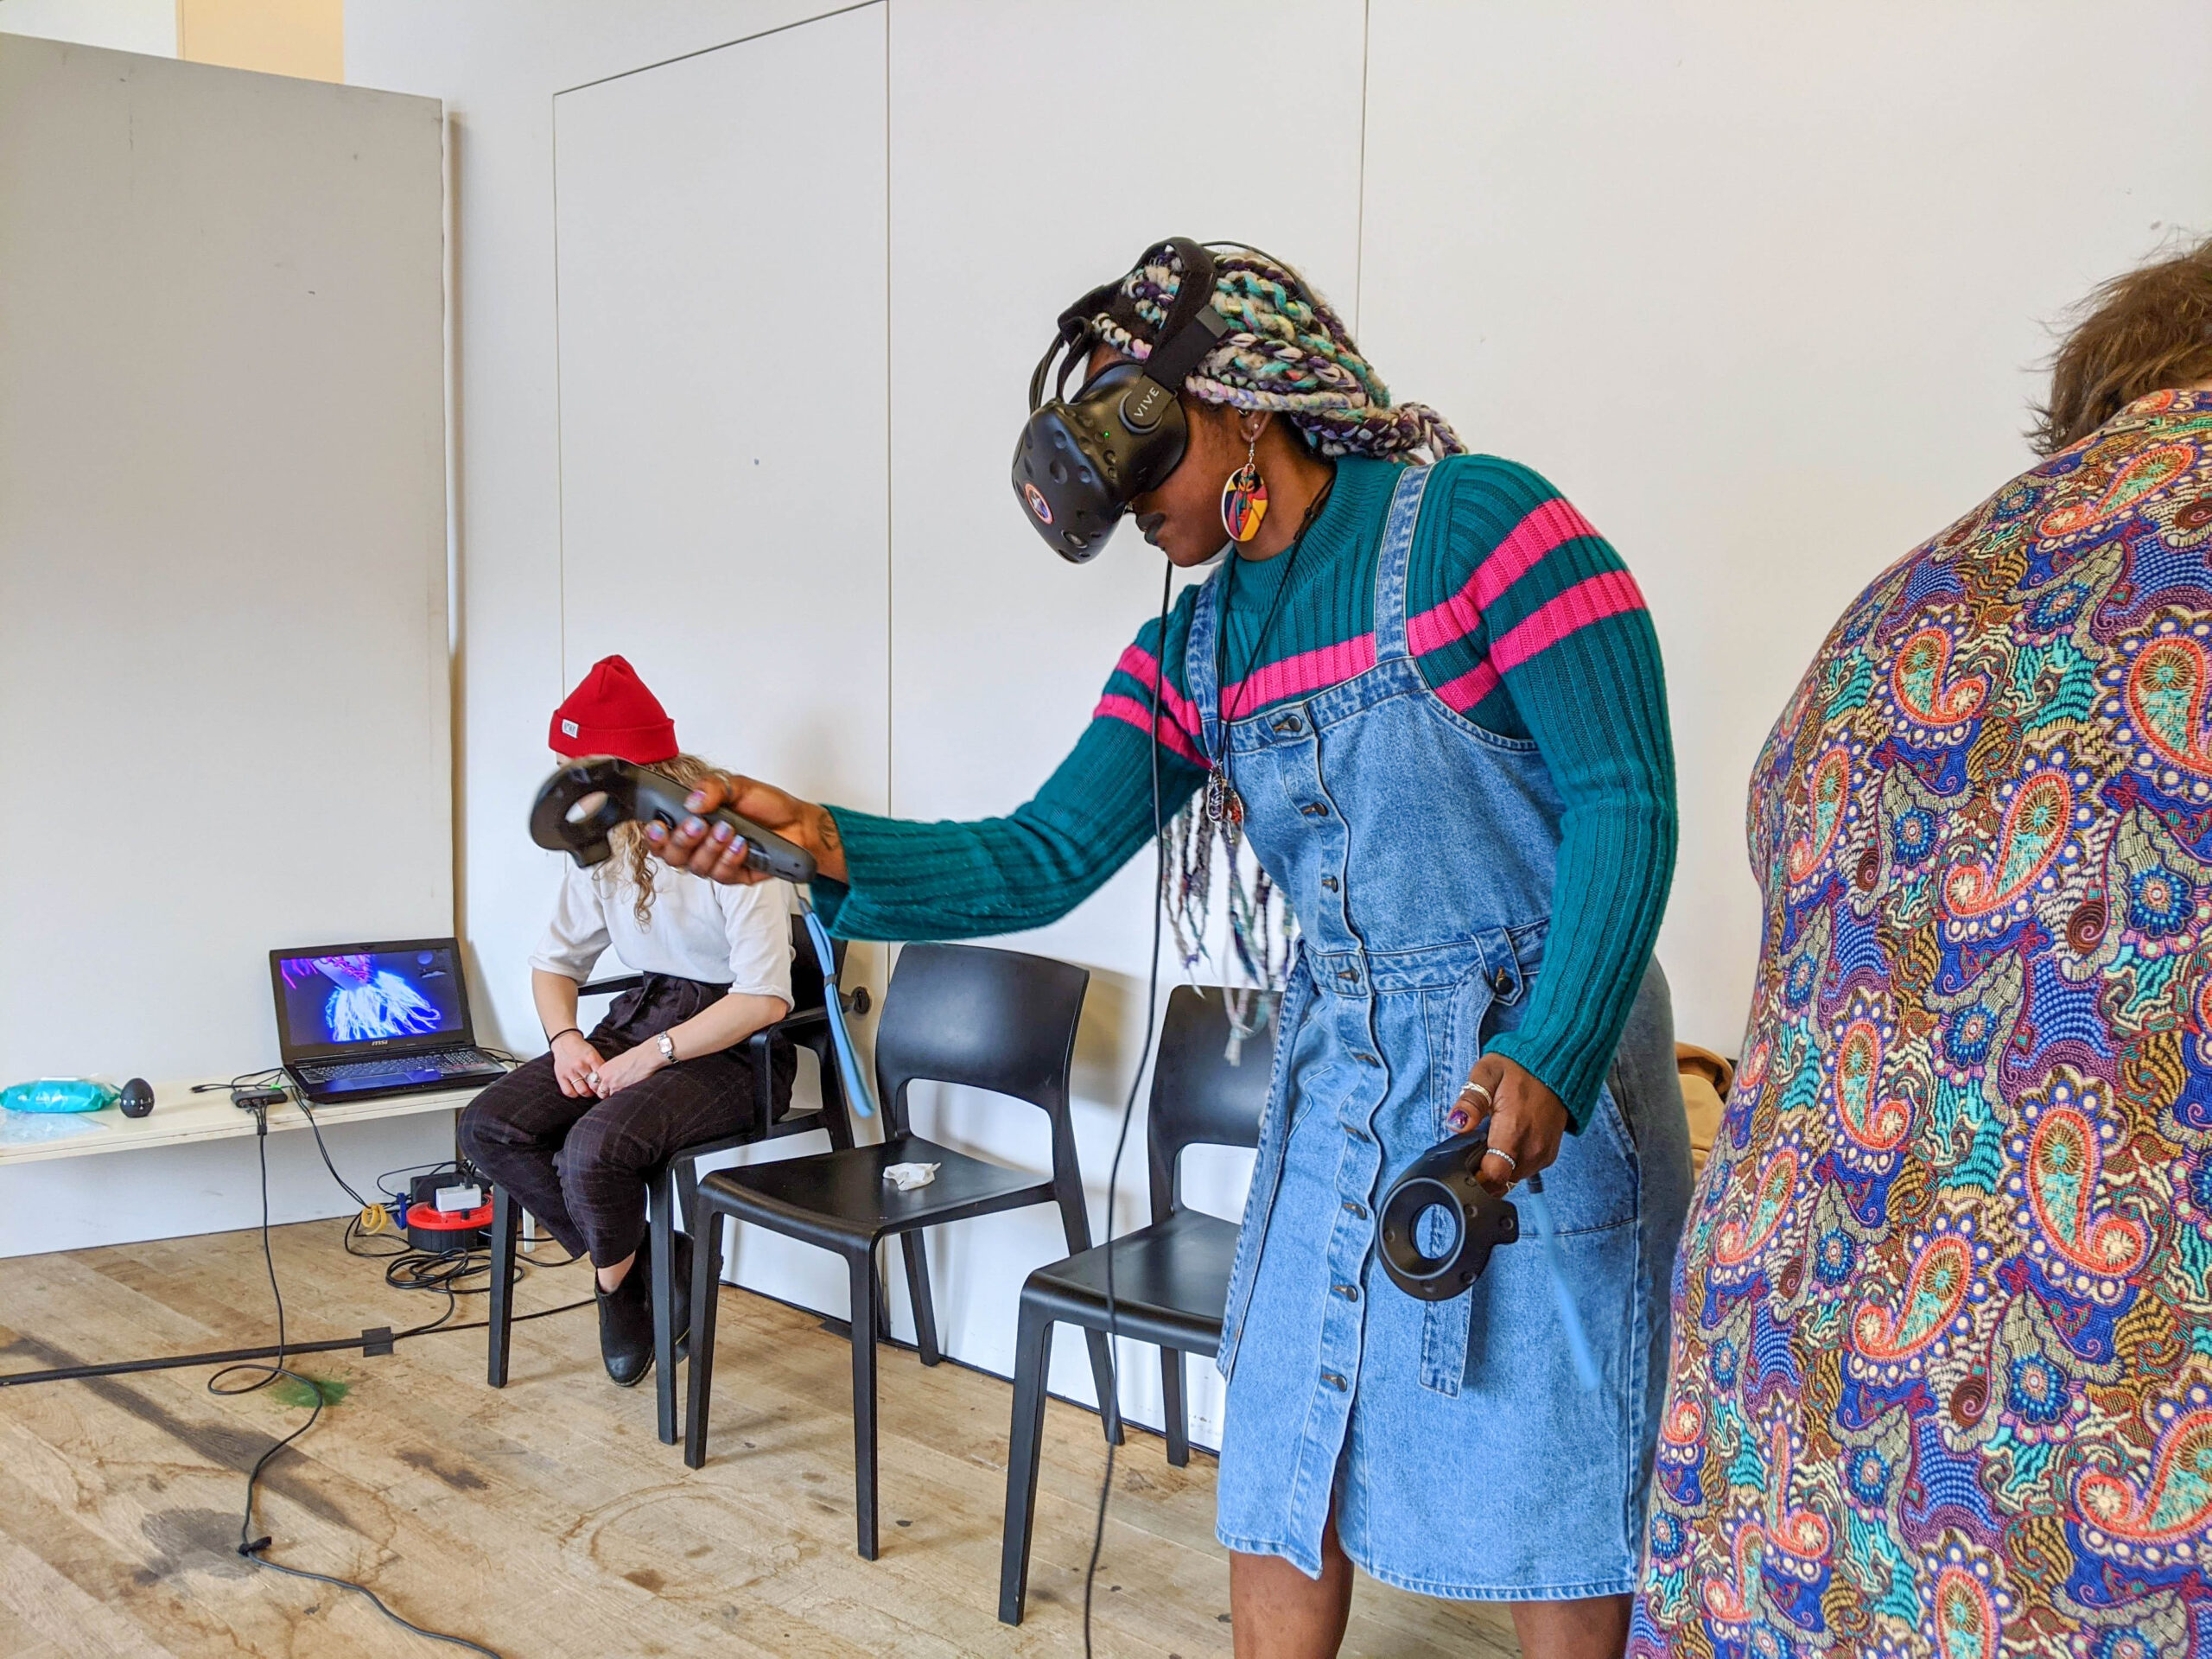 black woman with long white hair wearing a VR headset and holding a controller in a workshop space